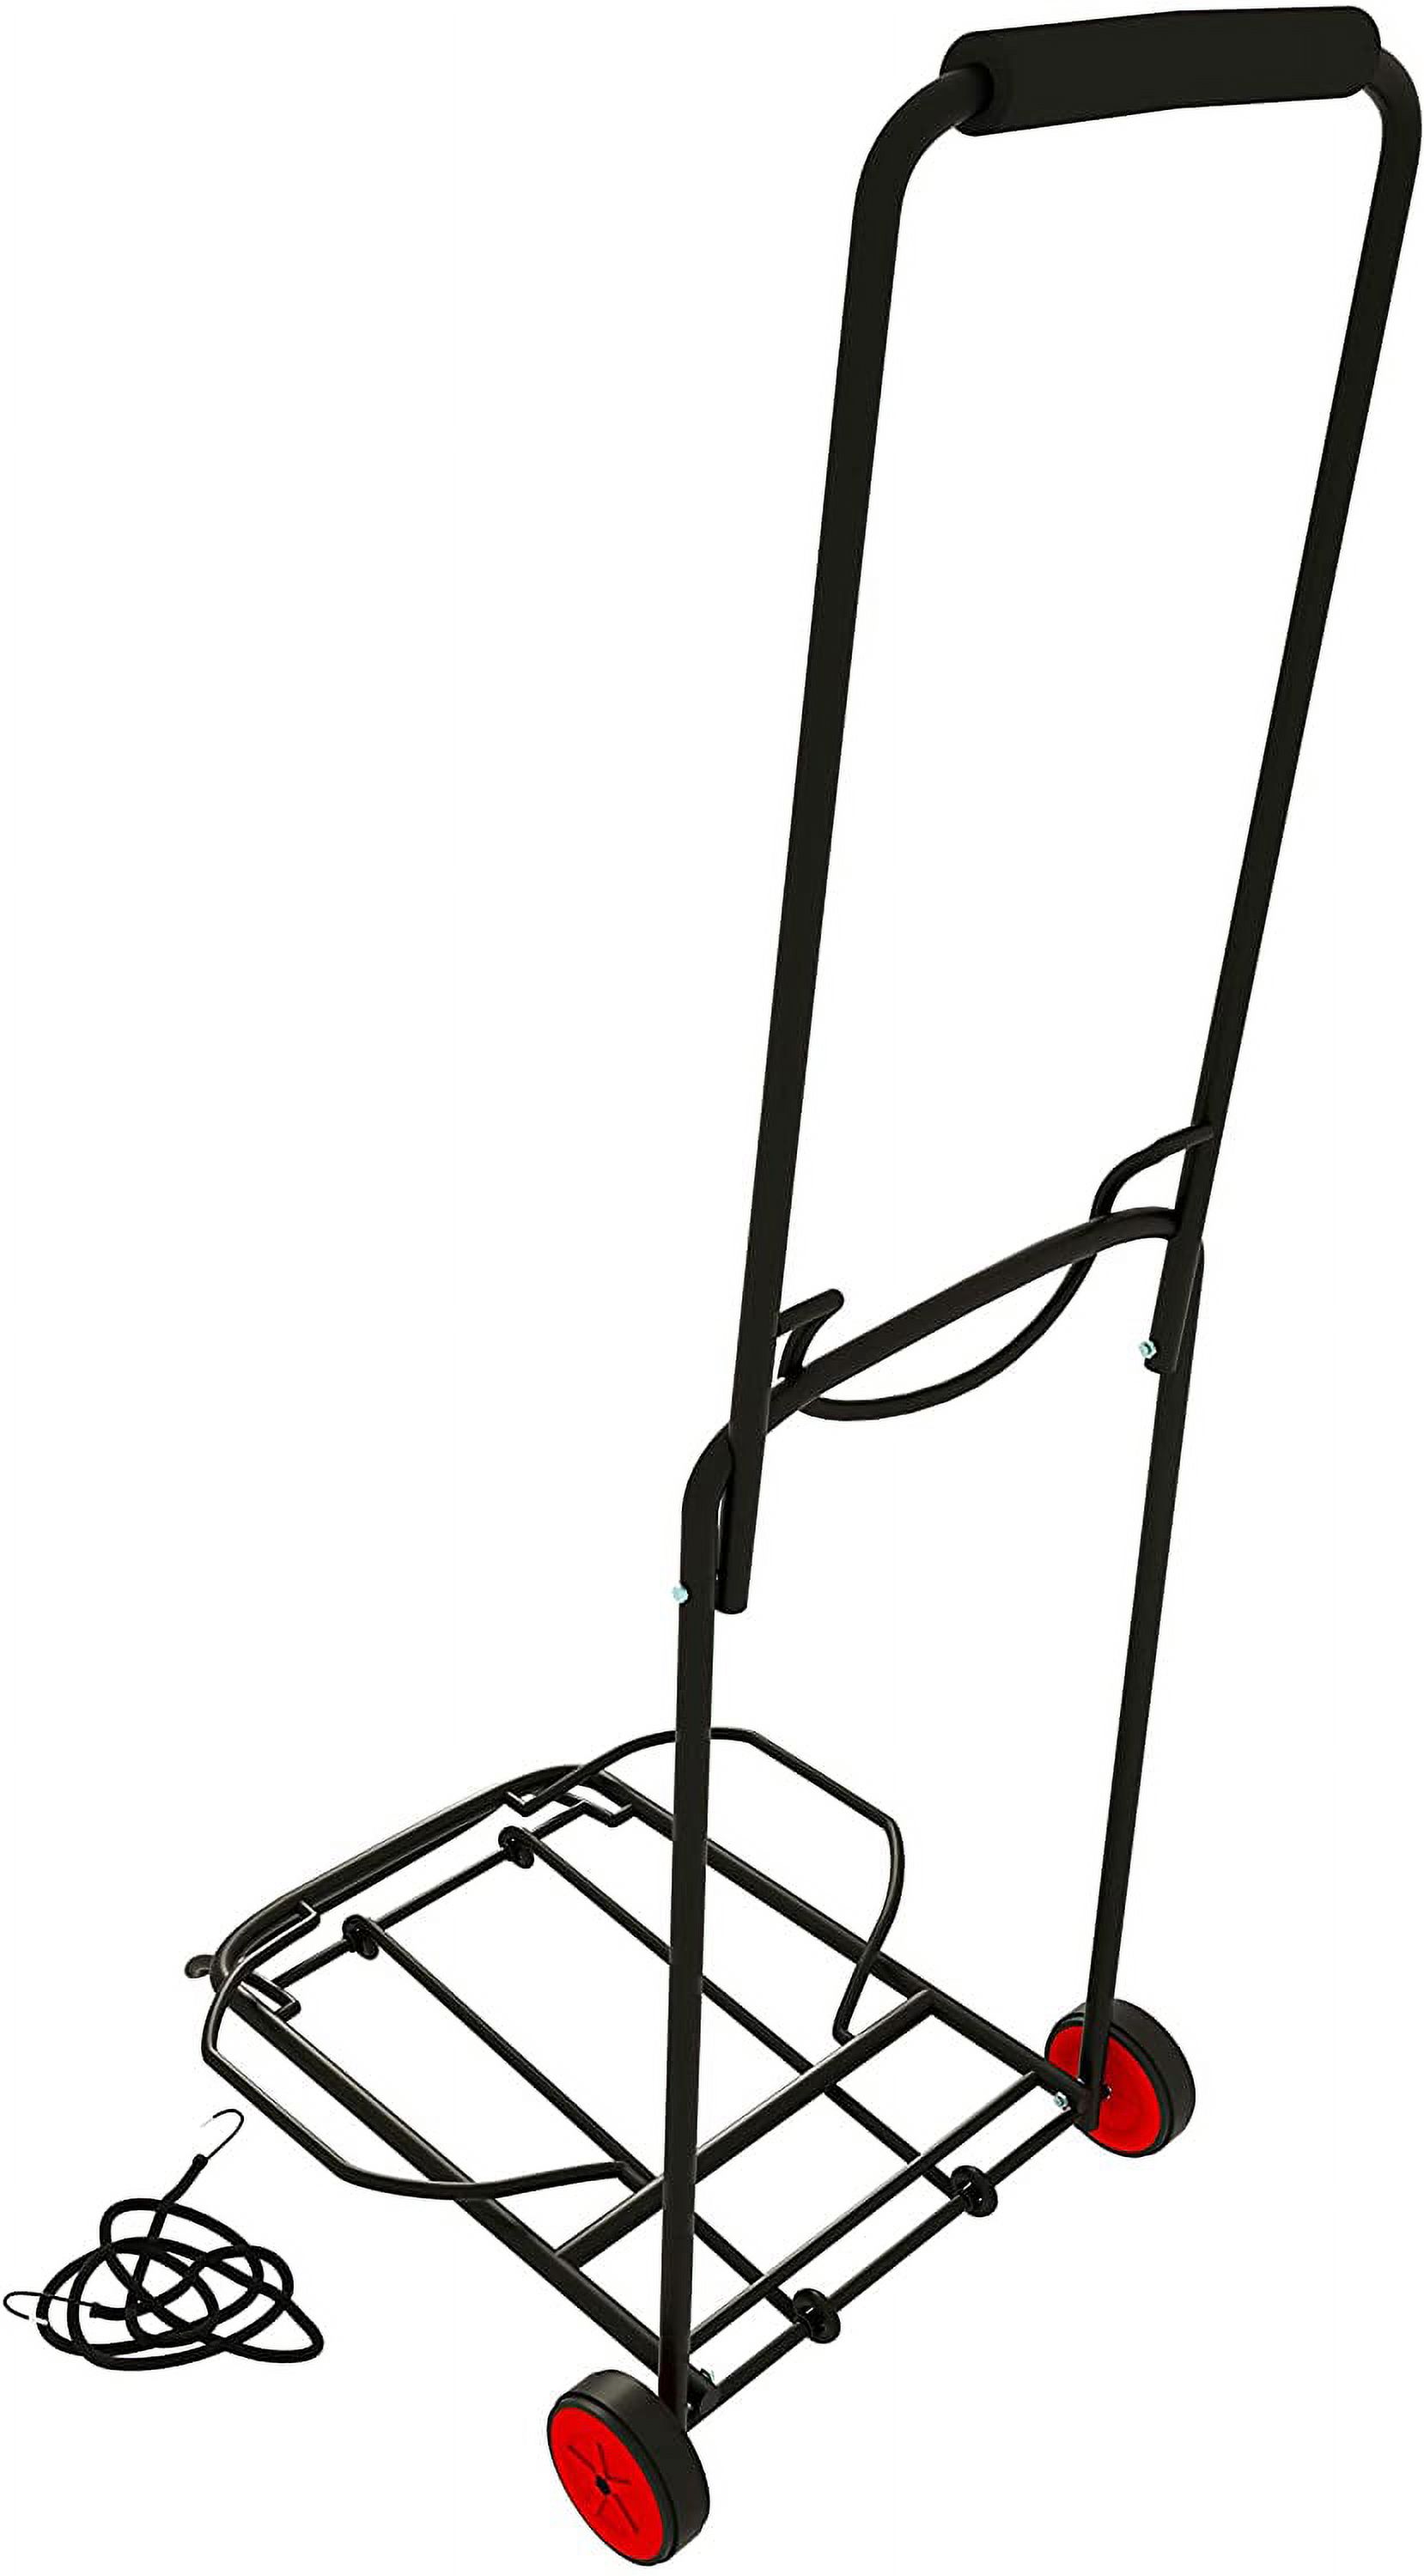 ISOP Folding Dolly Cart - Hand Truck - Compact Lightest Trolley - 2 Wheels, 80 lb, Elastic Cord Included - image 5 of 8